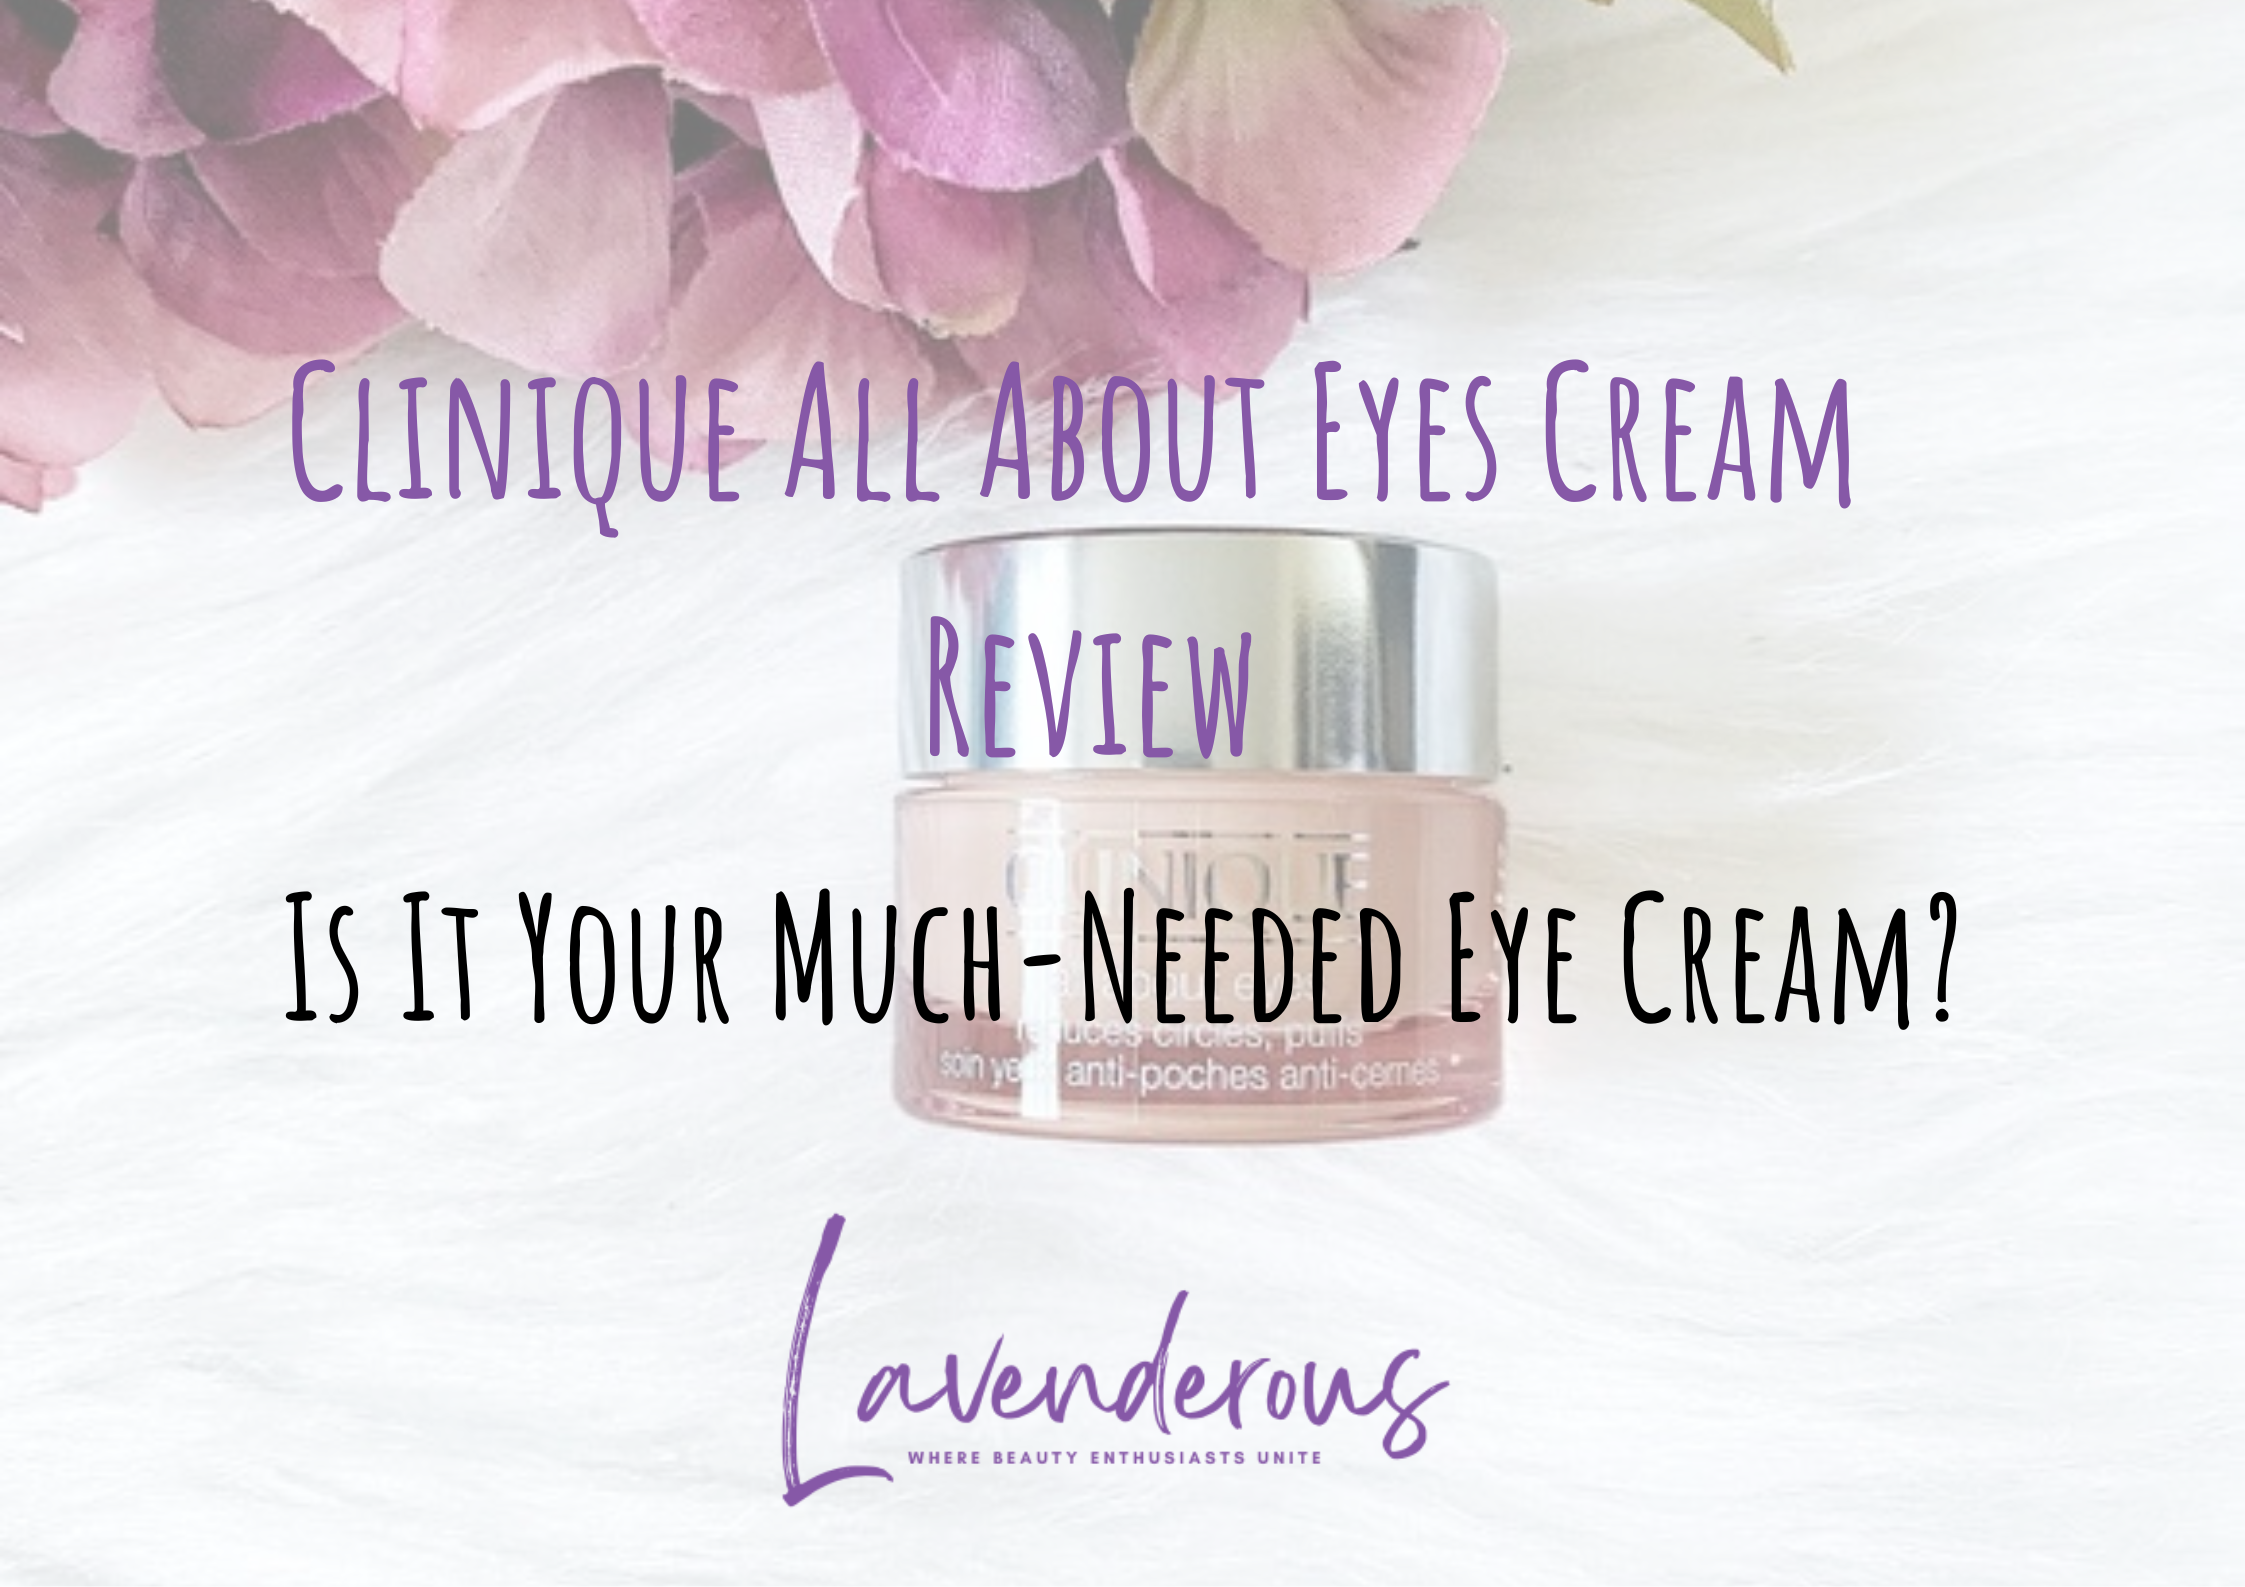 Clinique All About Eyes Cream Reviews